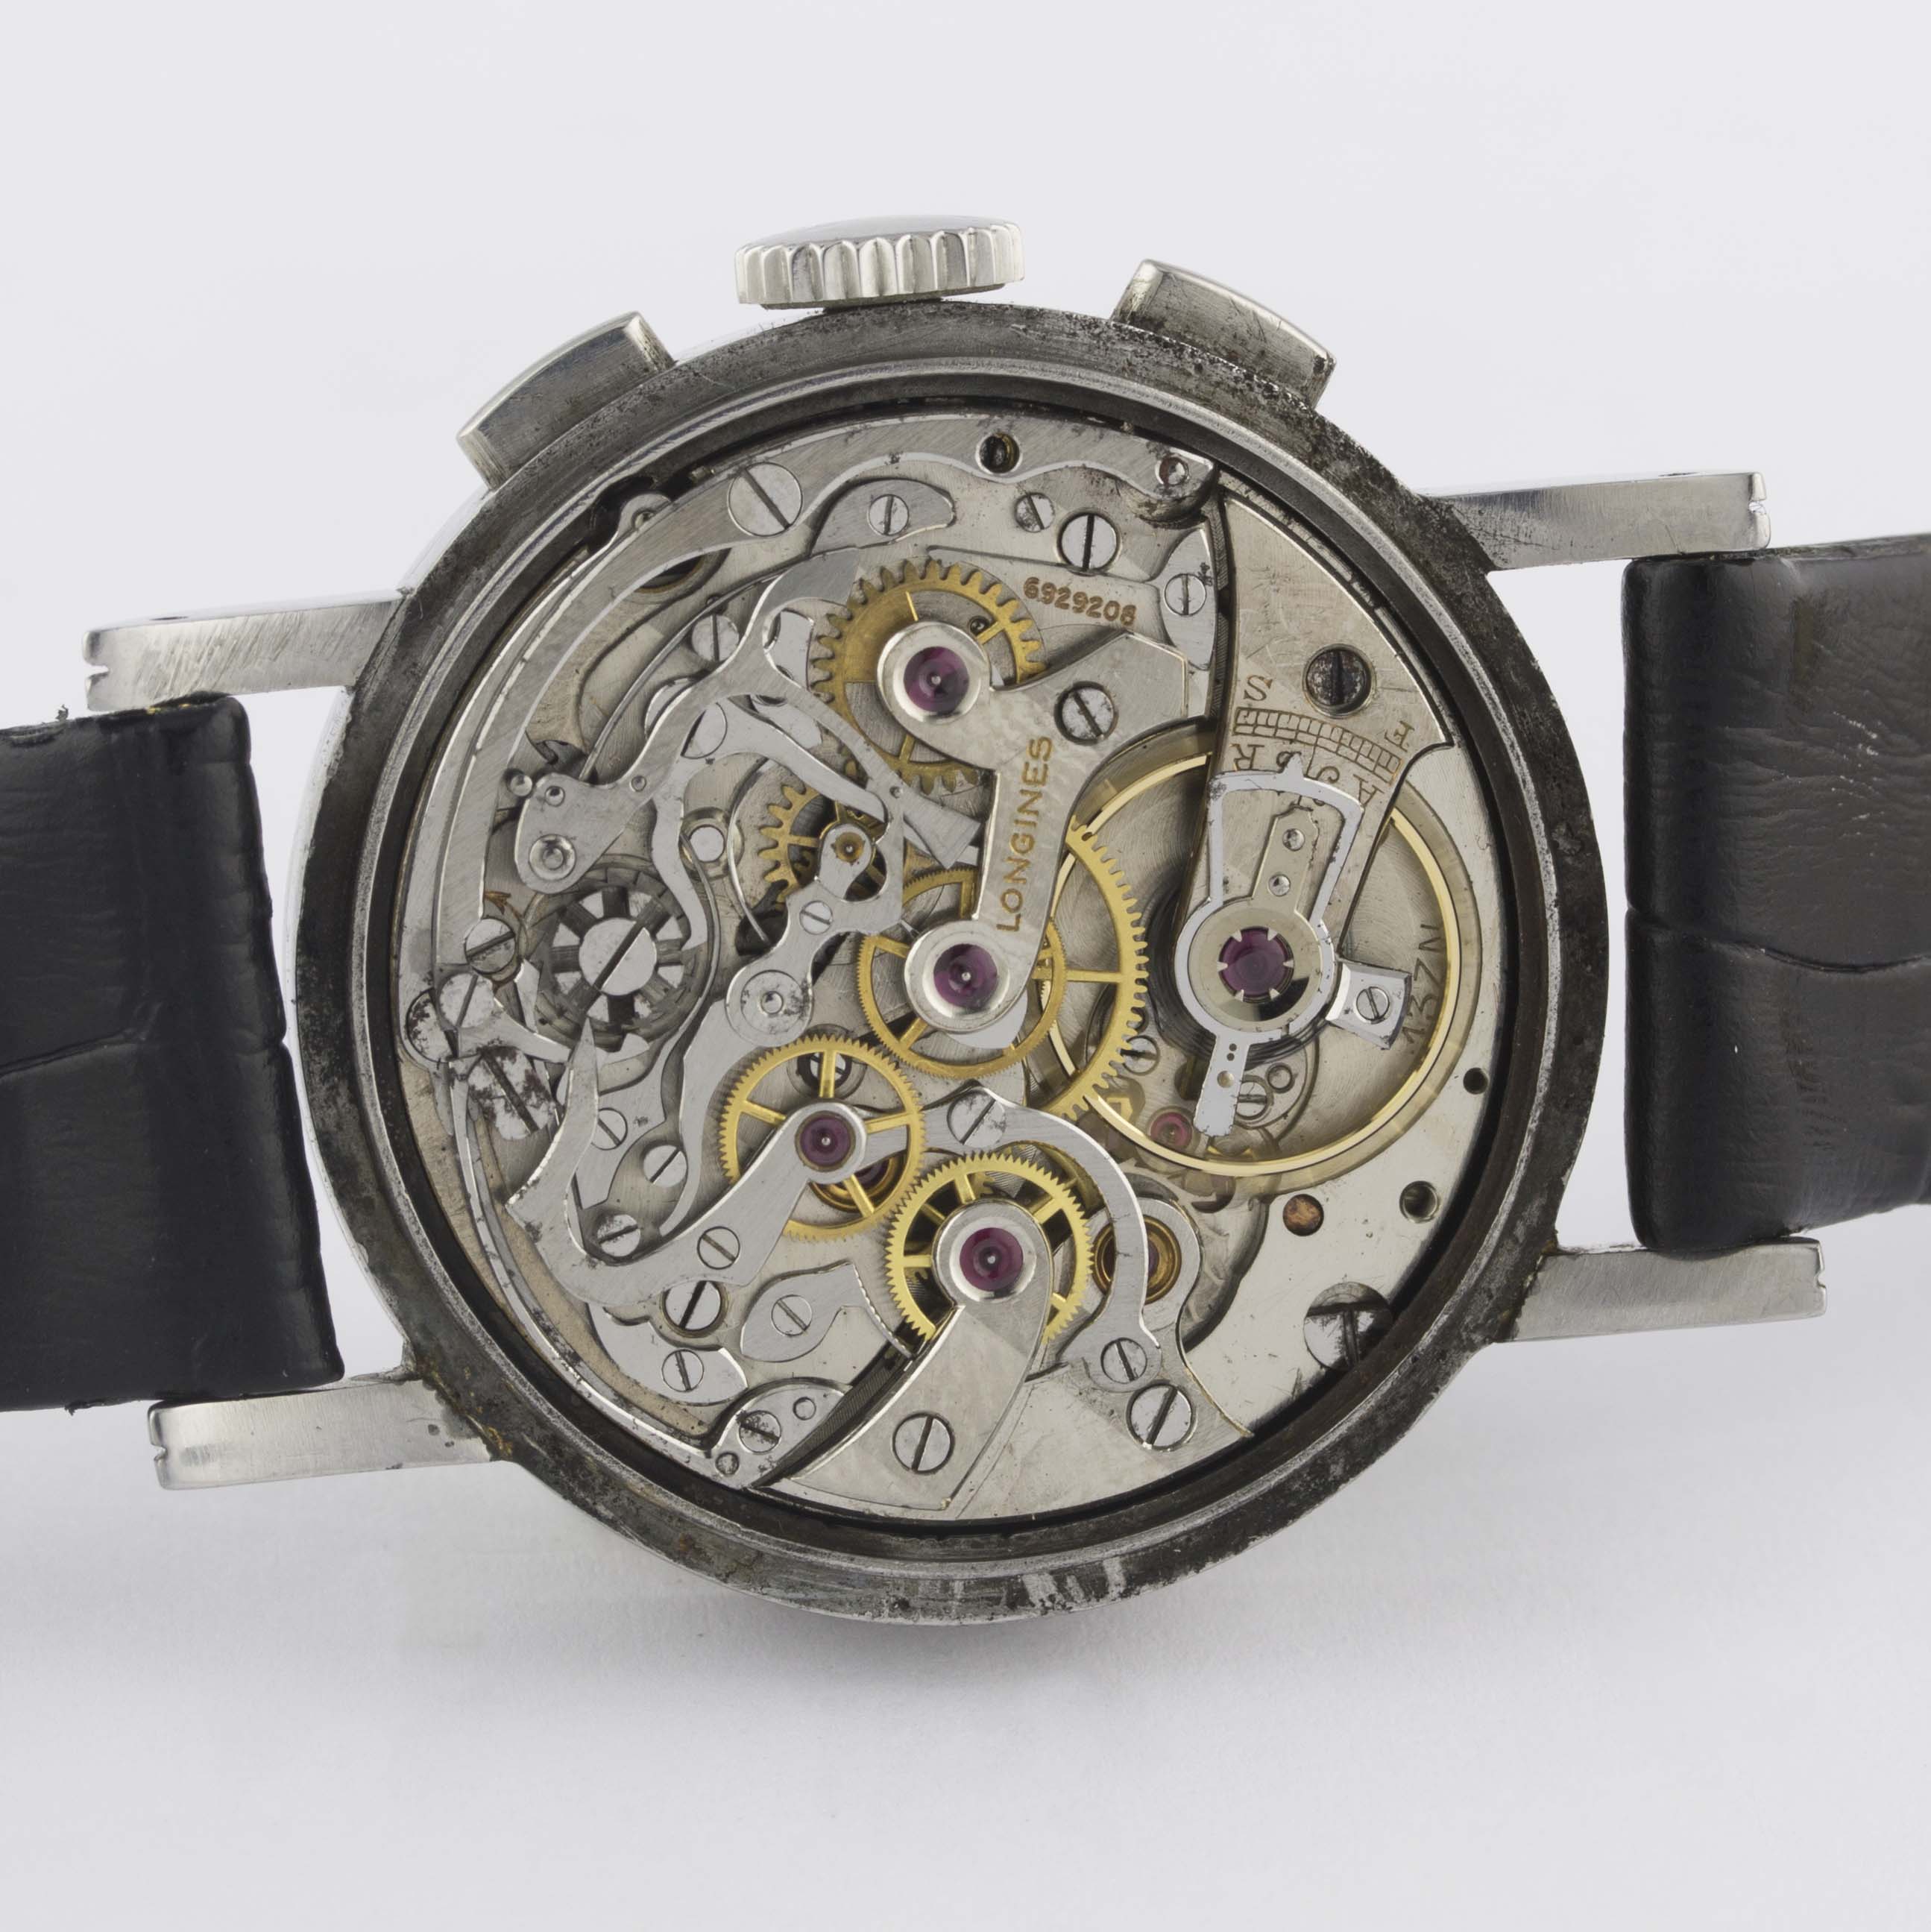 A GENTLEMAN'S STAINLESS STEEL LONGINES FLYBACK CHRONOGRAPH WRIST WATCH CIRCA 1946, REF. 3226 - Image 7 of 10